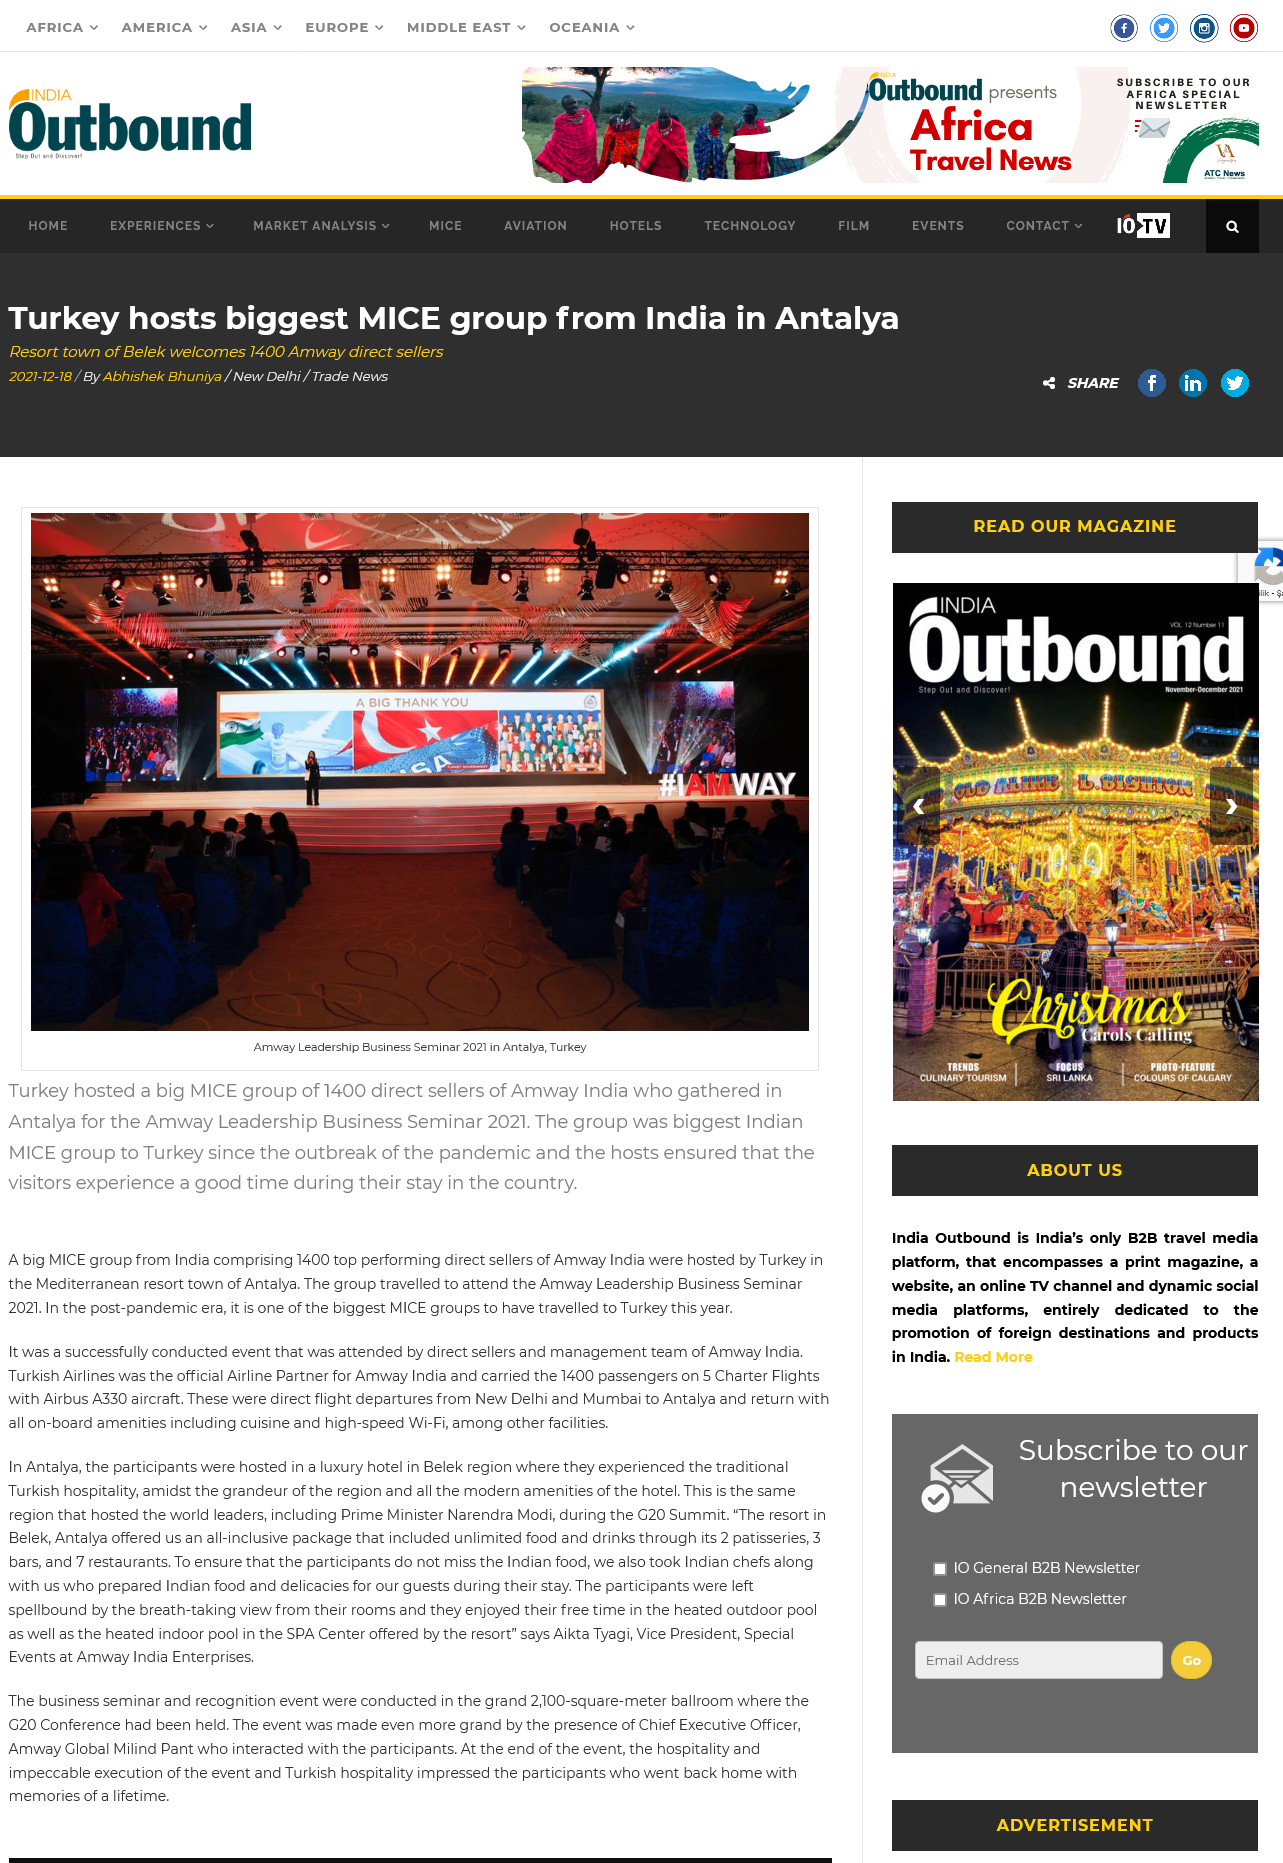 Turkey hosts biggest MICE group from India in Antalya